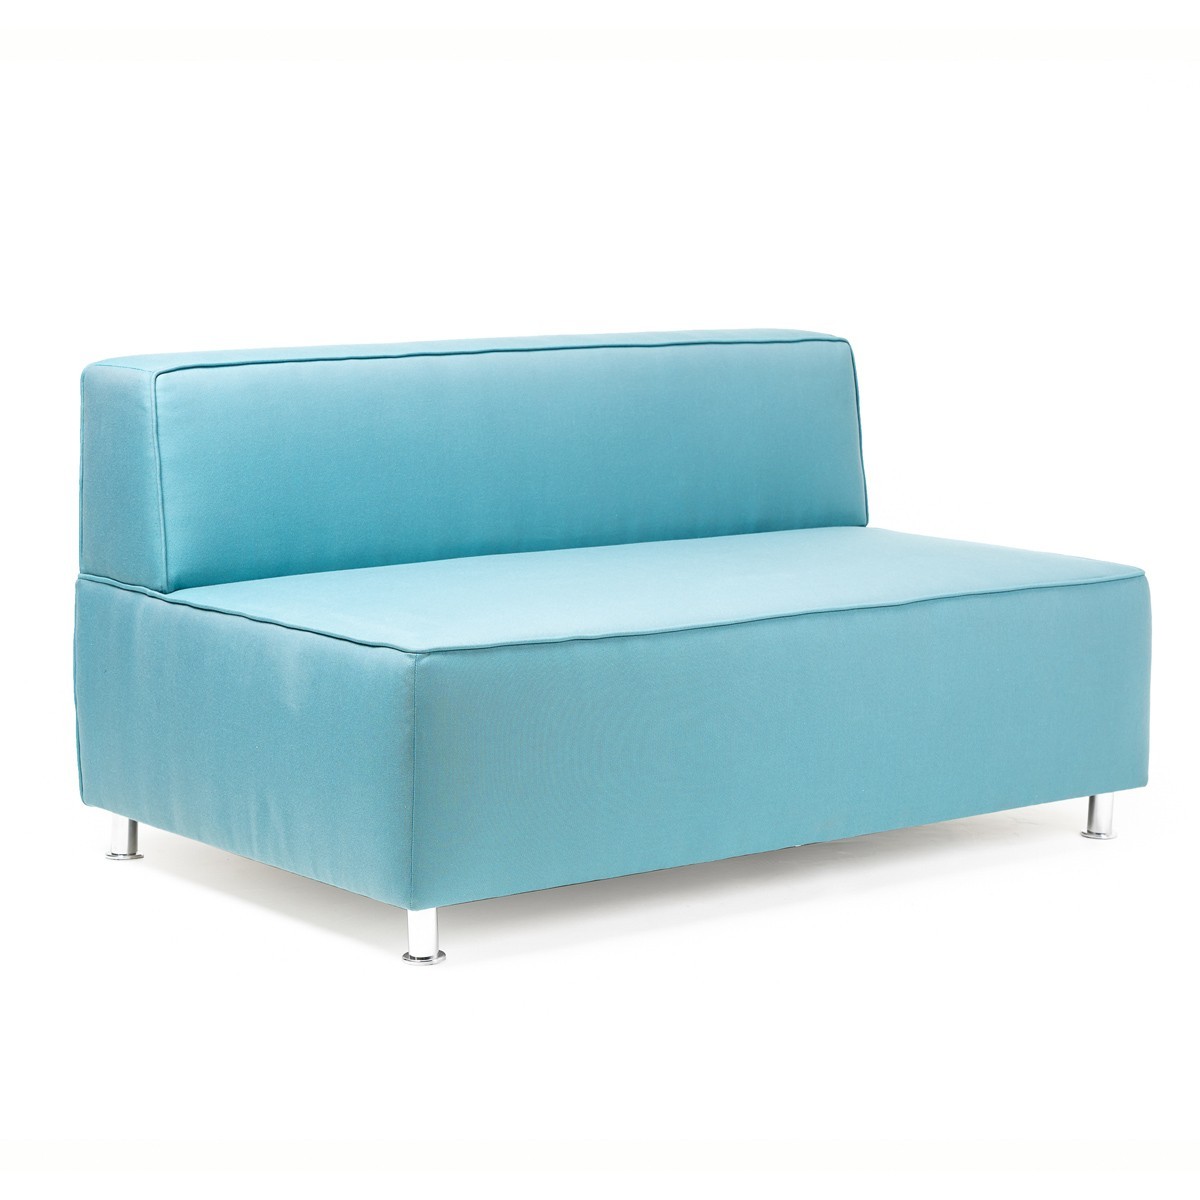 Tosca - 2 seater element